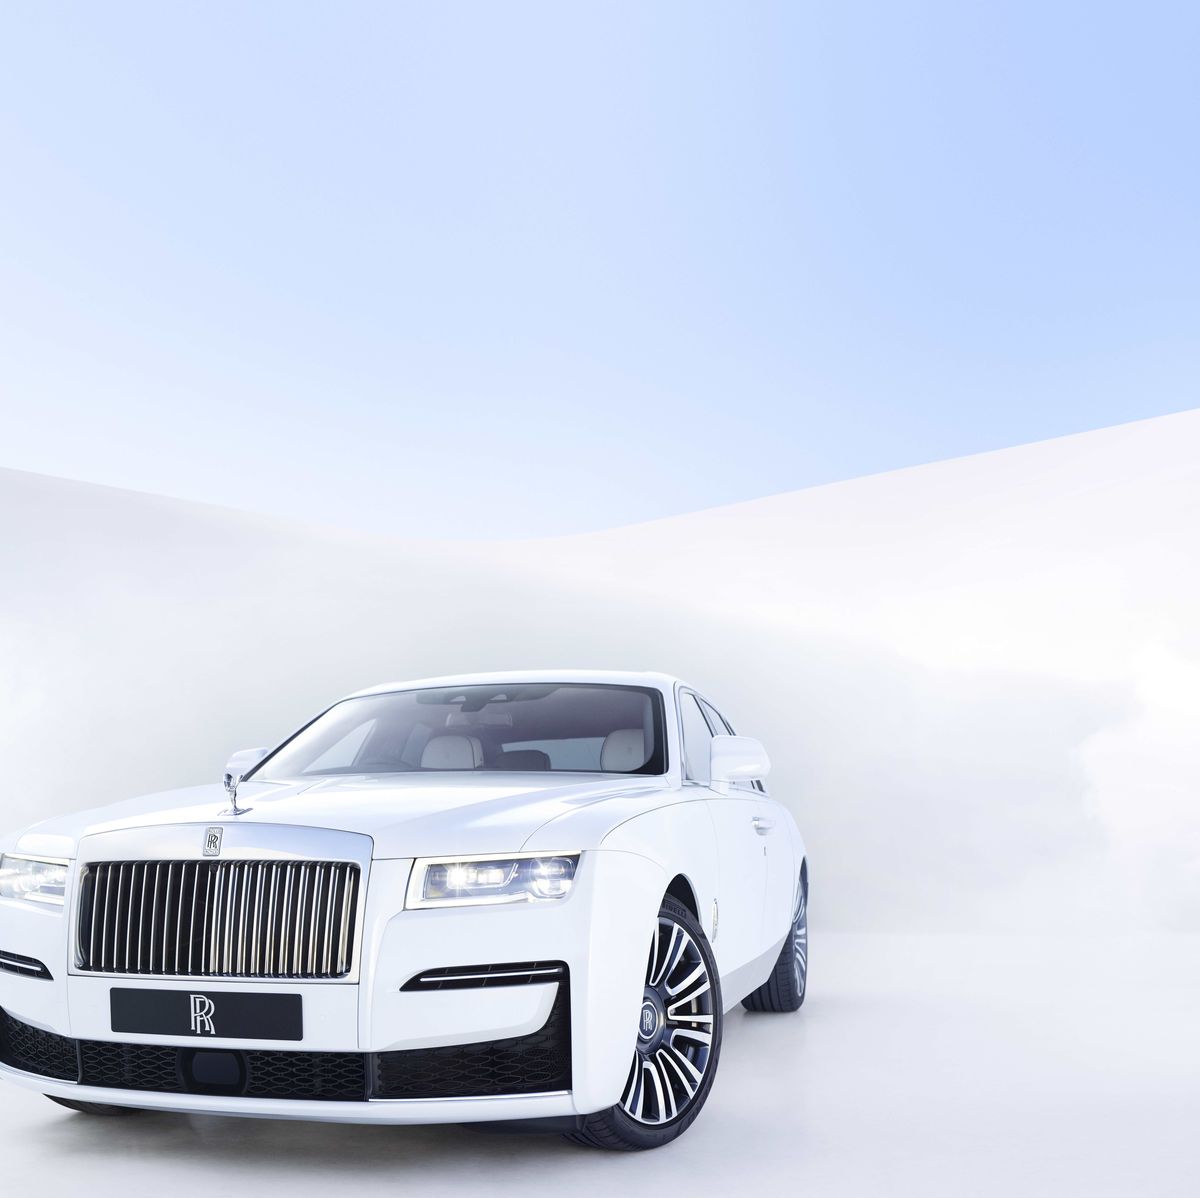 2021 Rolls-Royce Ghost Review: A $600,000 Oasis of Calm